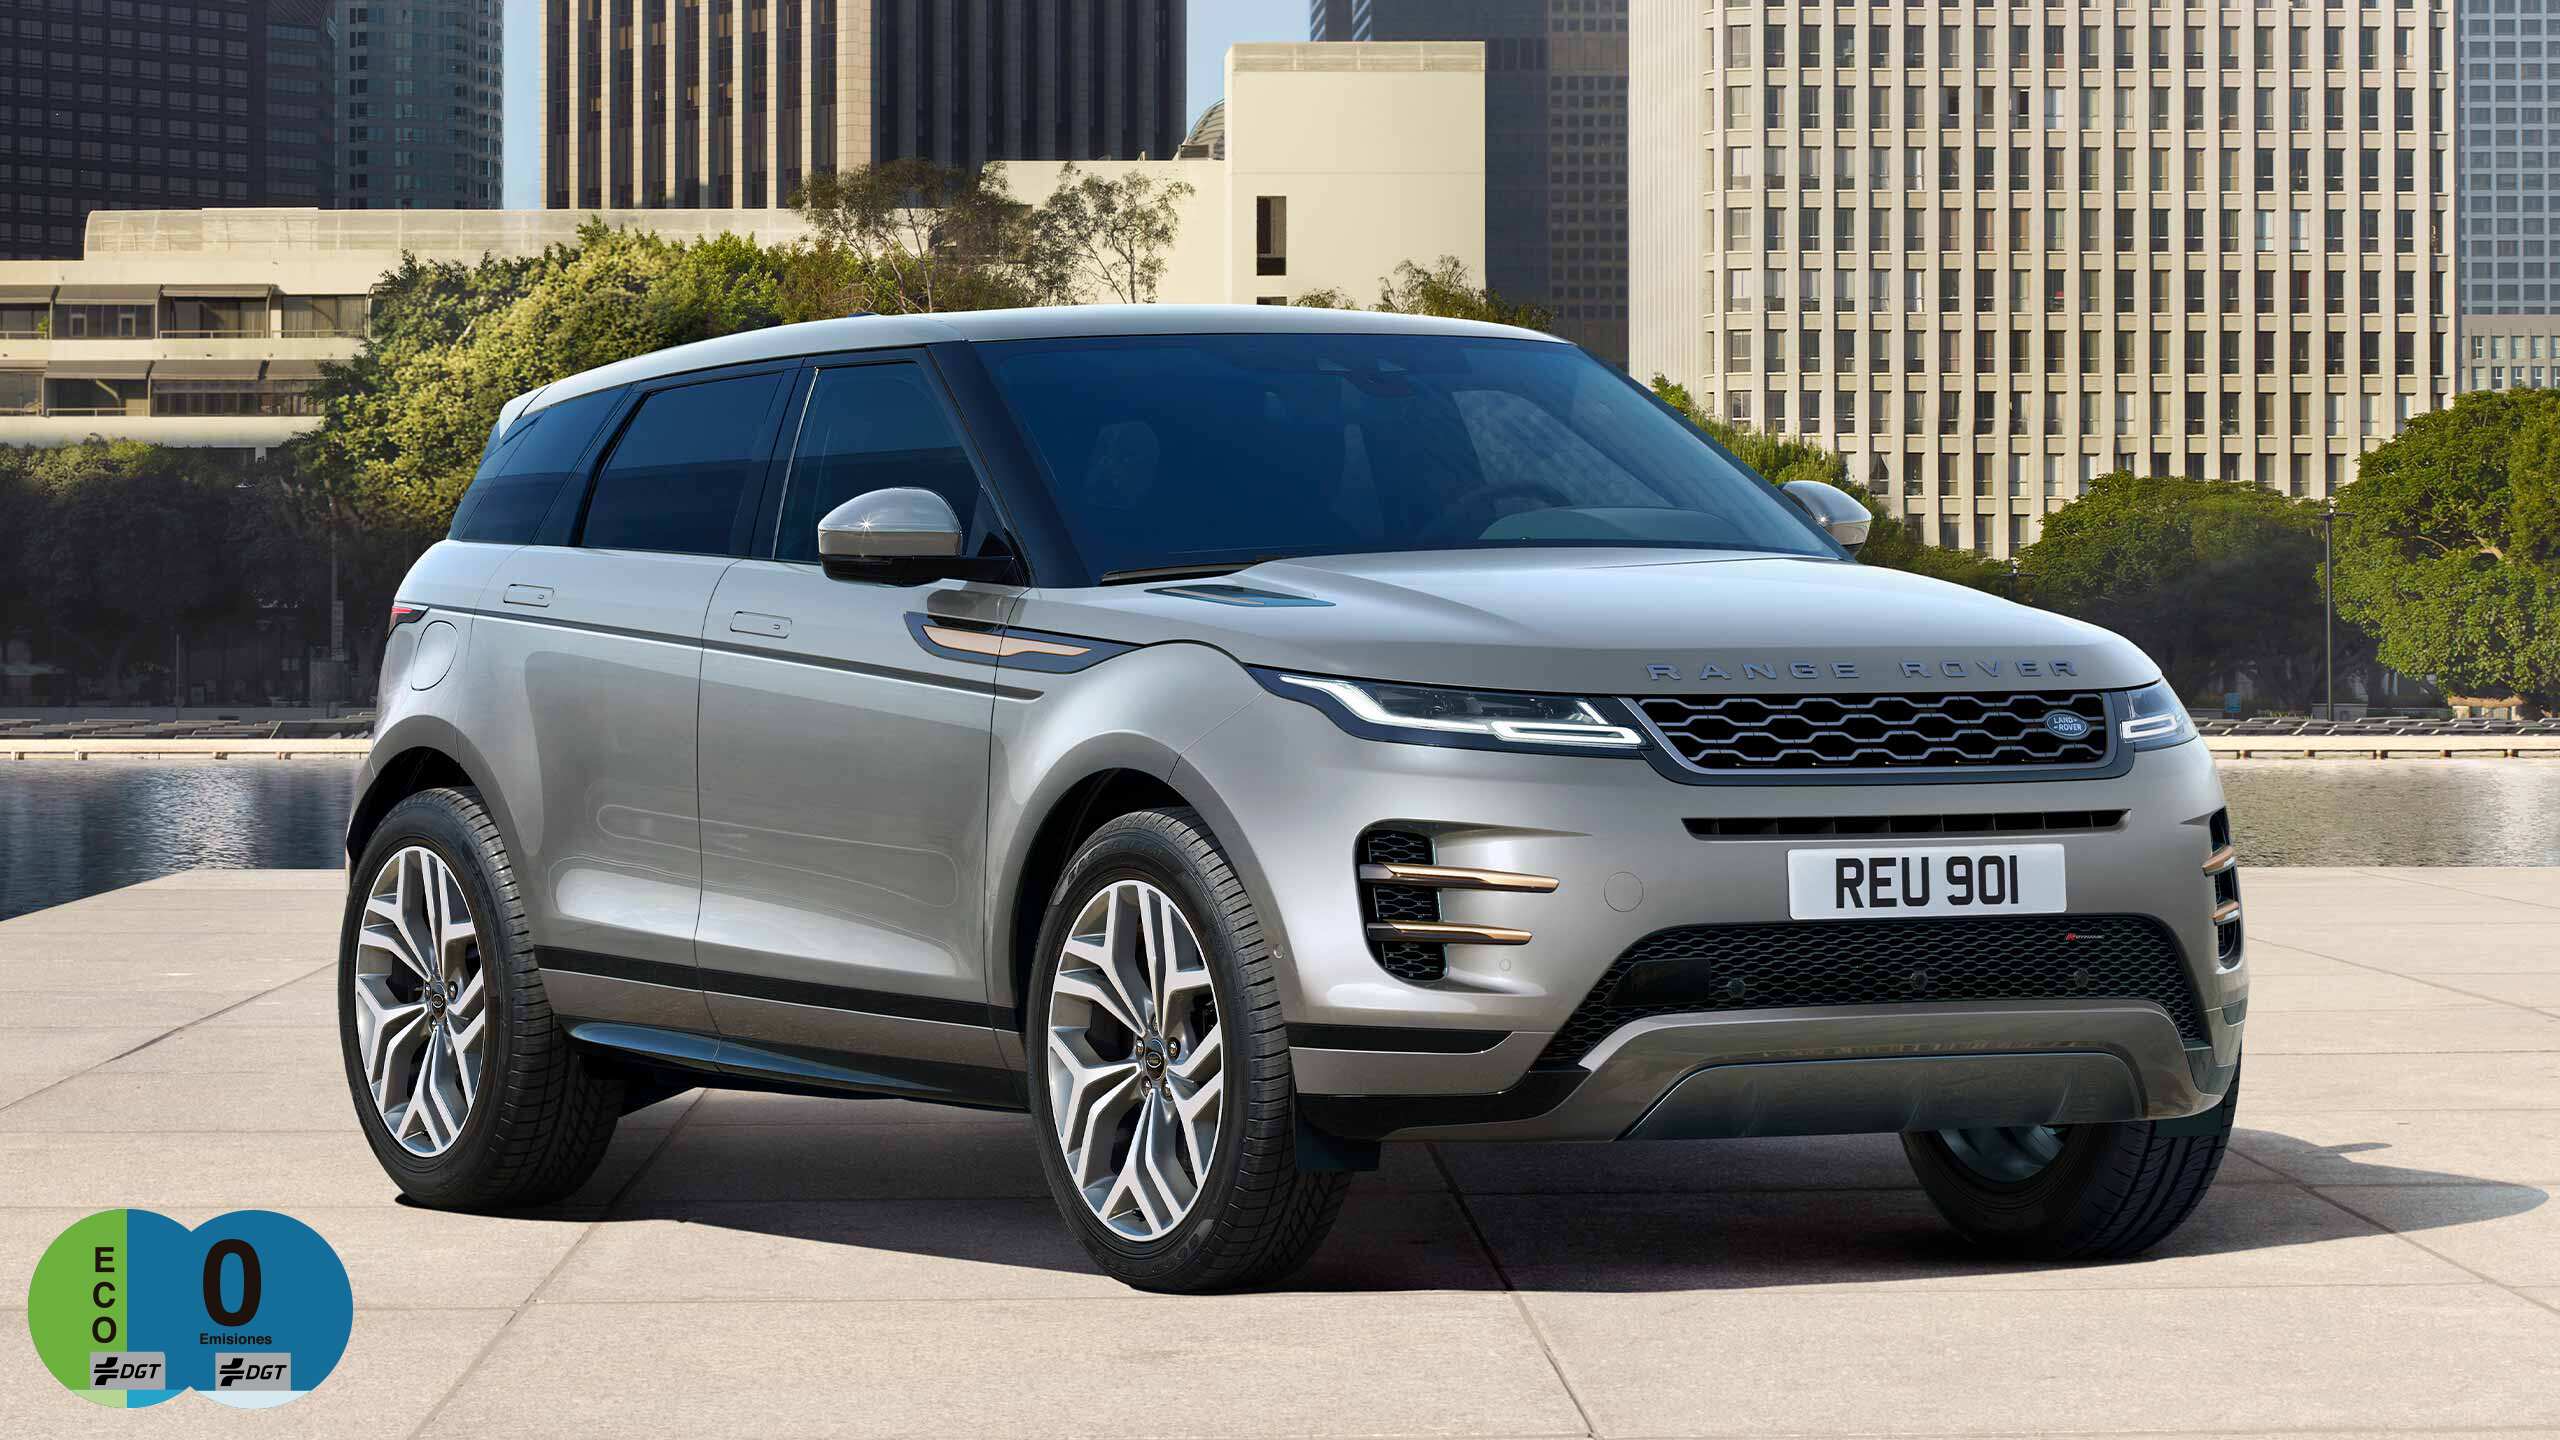 Evoque Parked By Garden Area Against Buildings In City